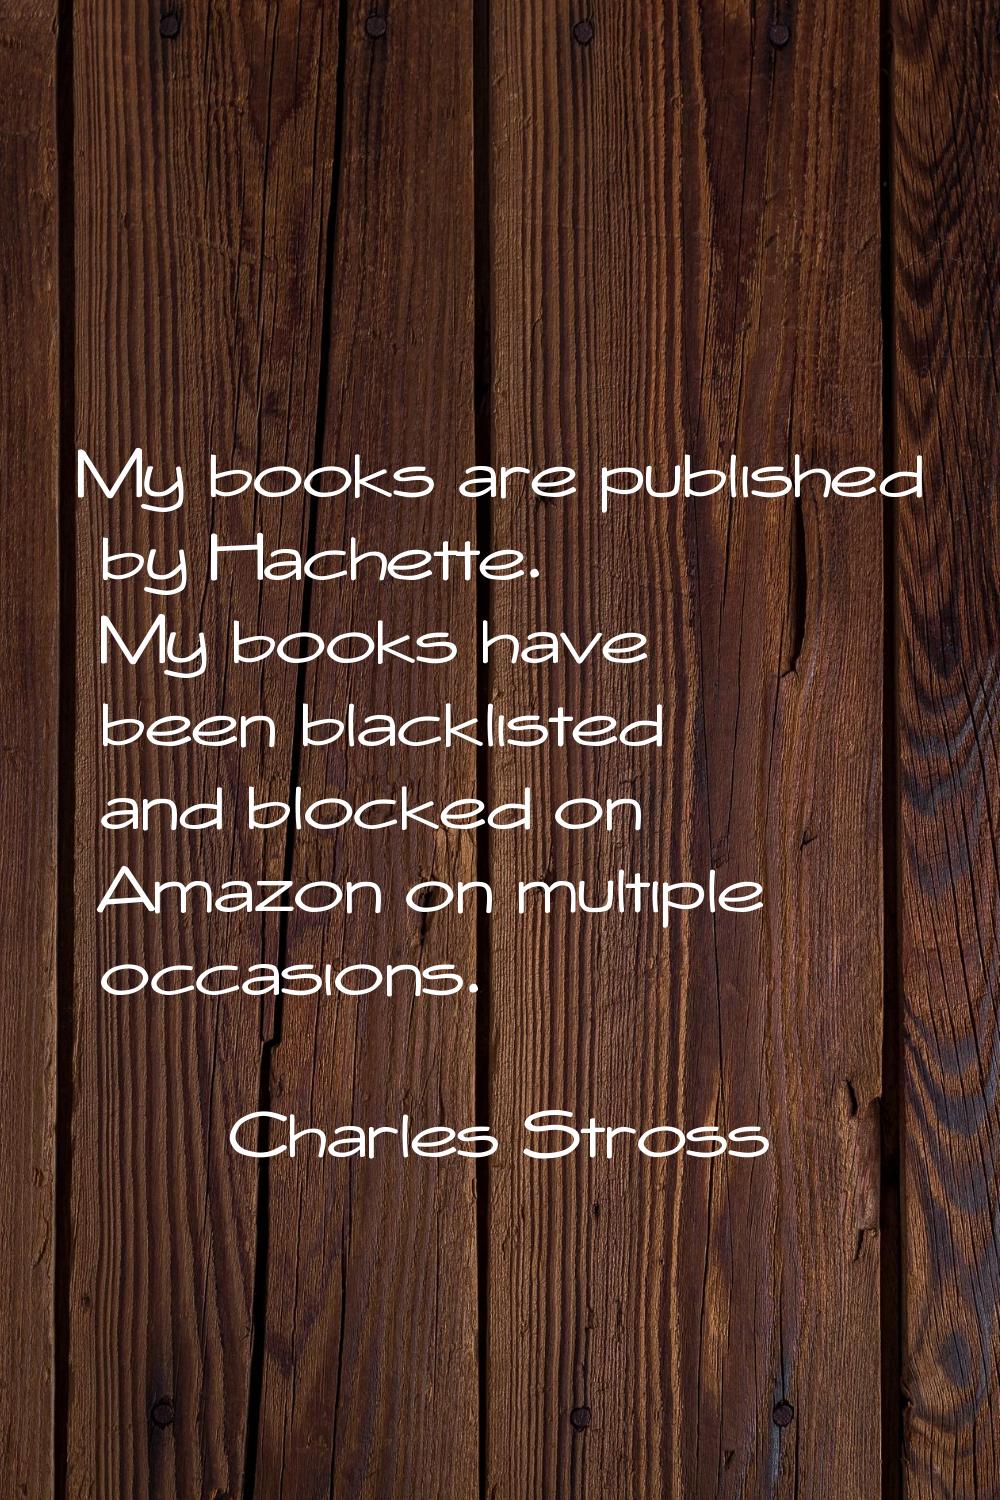 My books are published by Hachette. My books have been blacklisted and blocked on Amazon on multipl